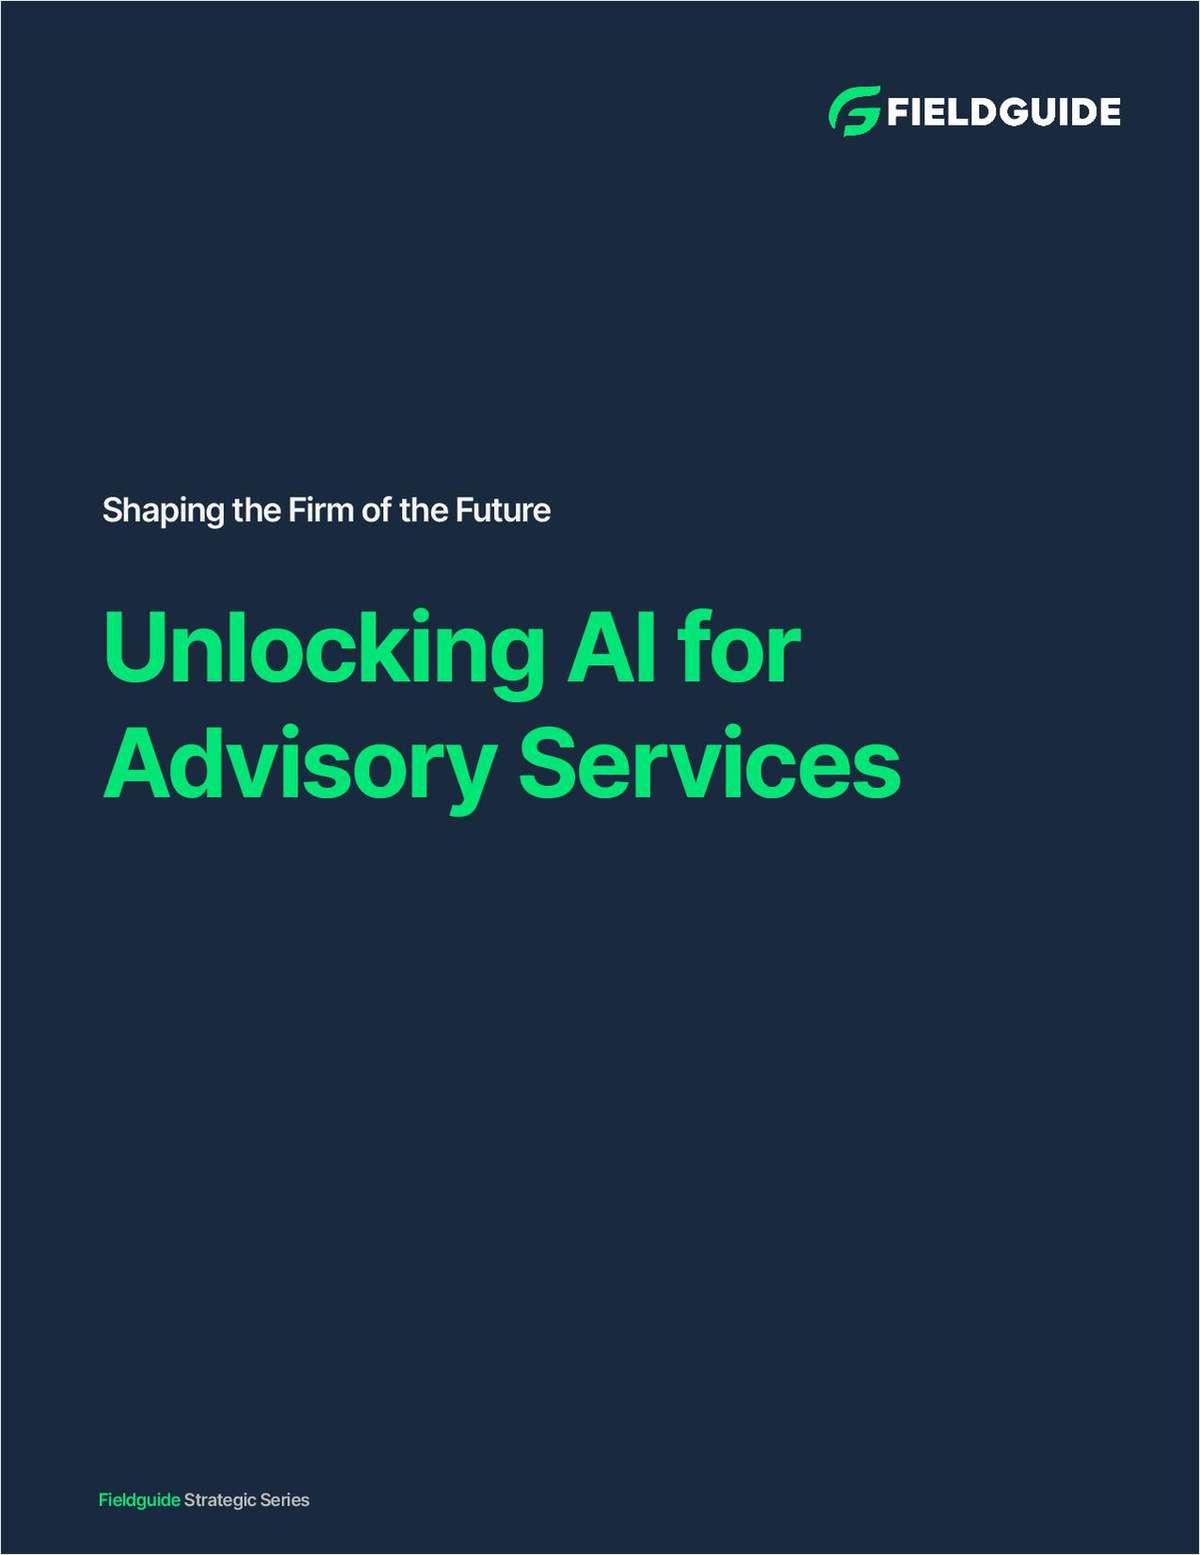 Unlocking AI: Shaping the Firm of the Future